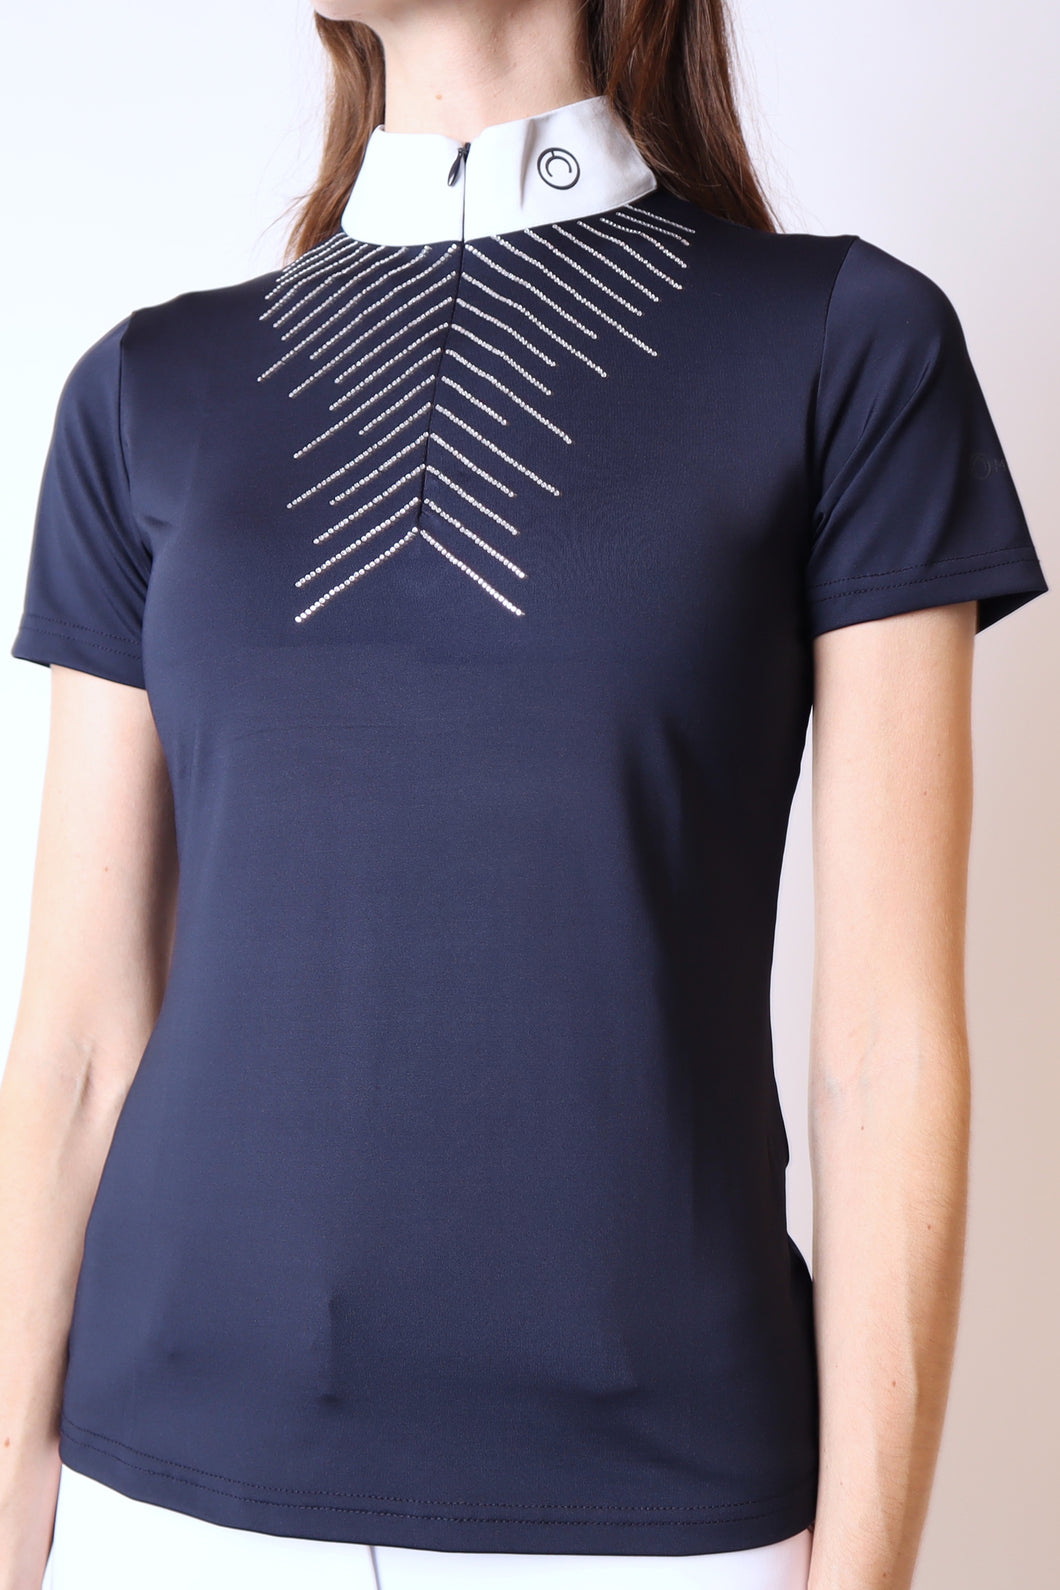 Bling Competition Shirt - Navy